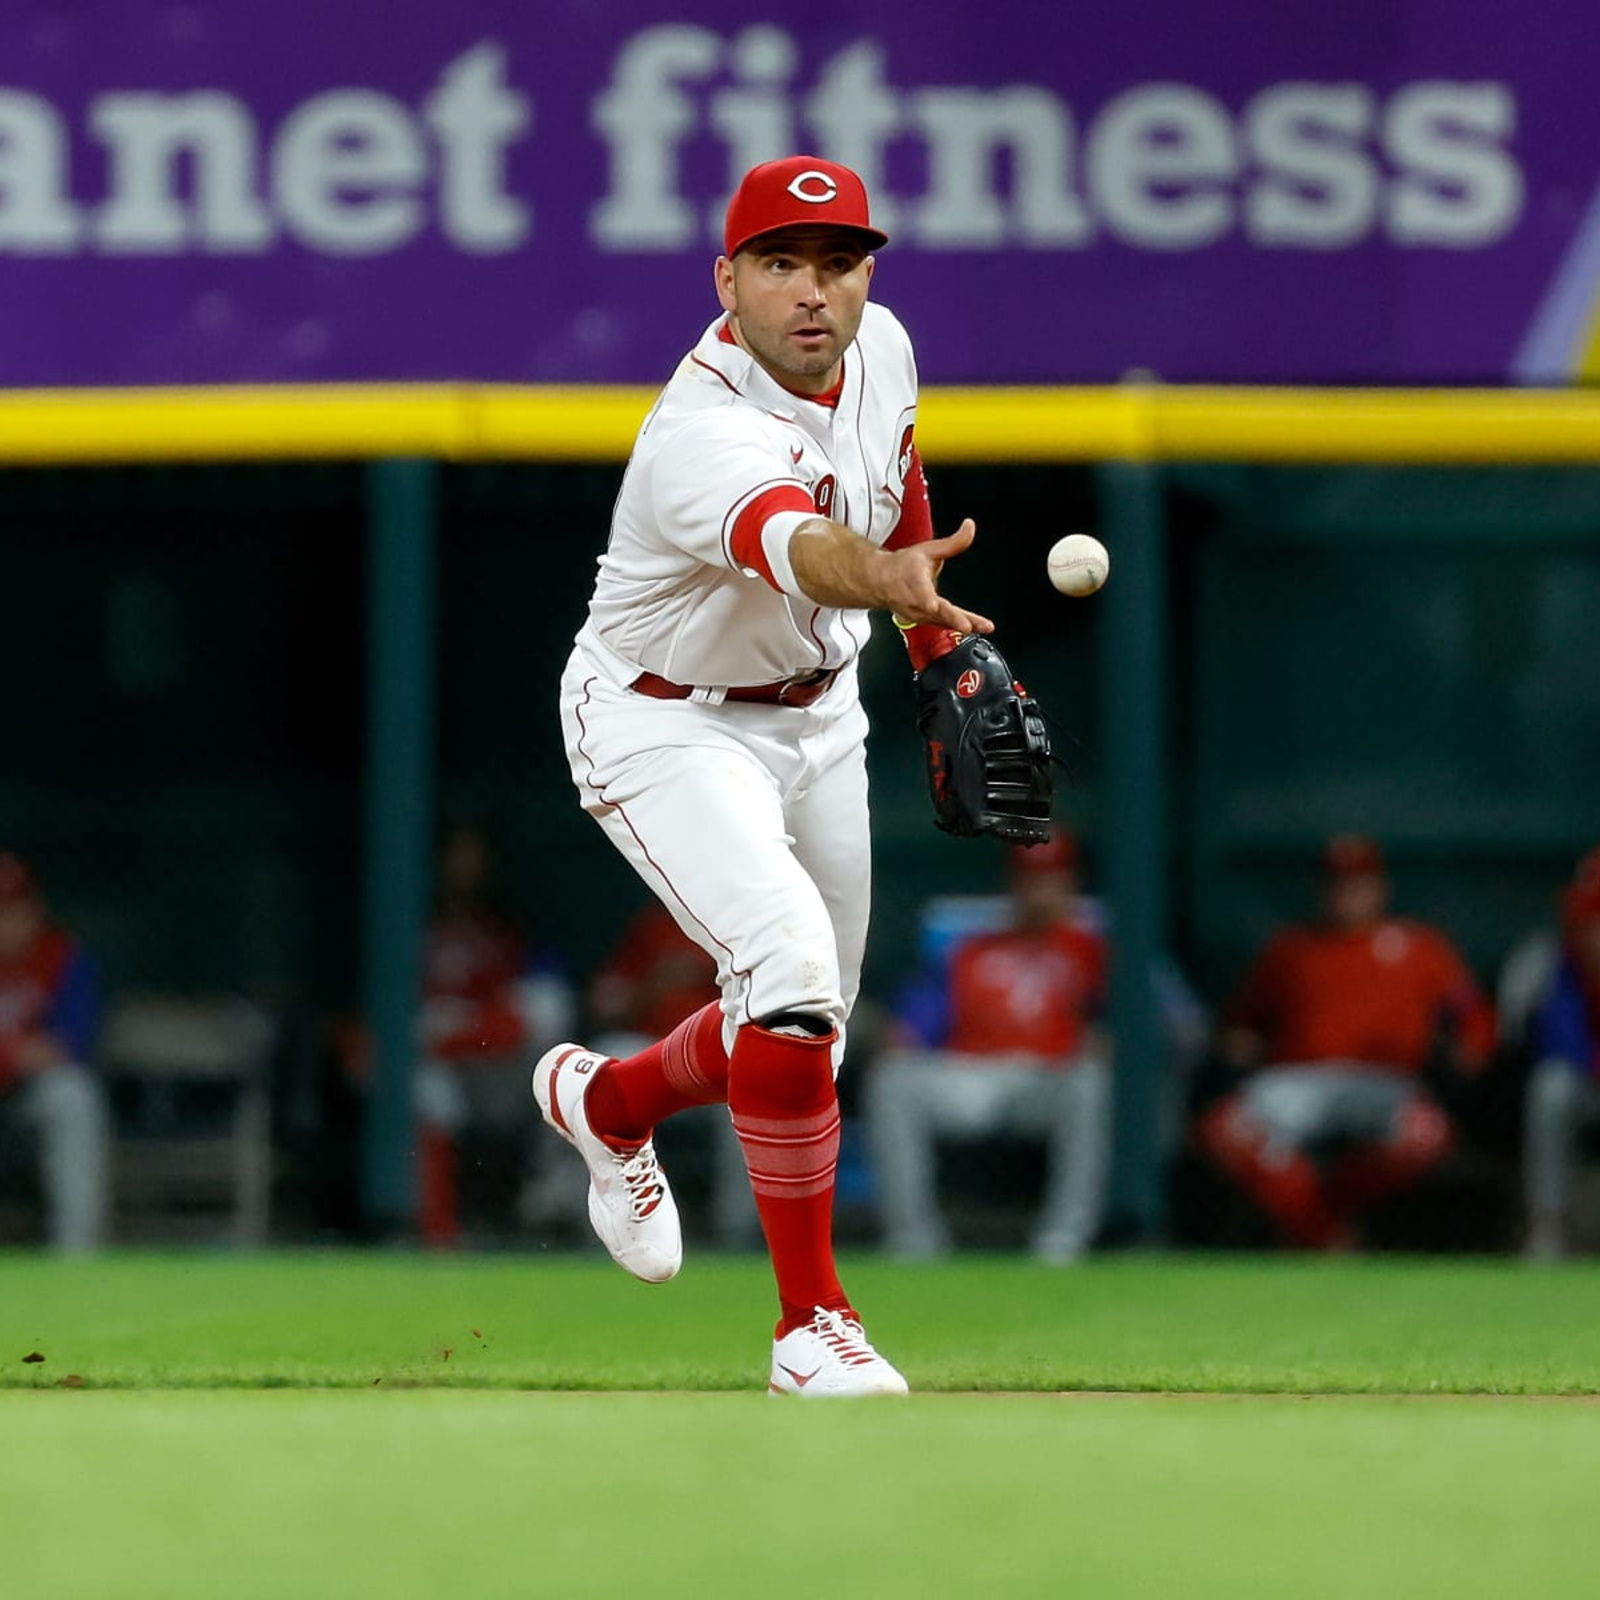 Reds: Joey Votto's season-ending surgery was 'successful